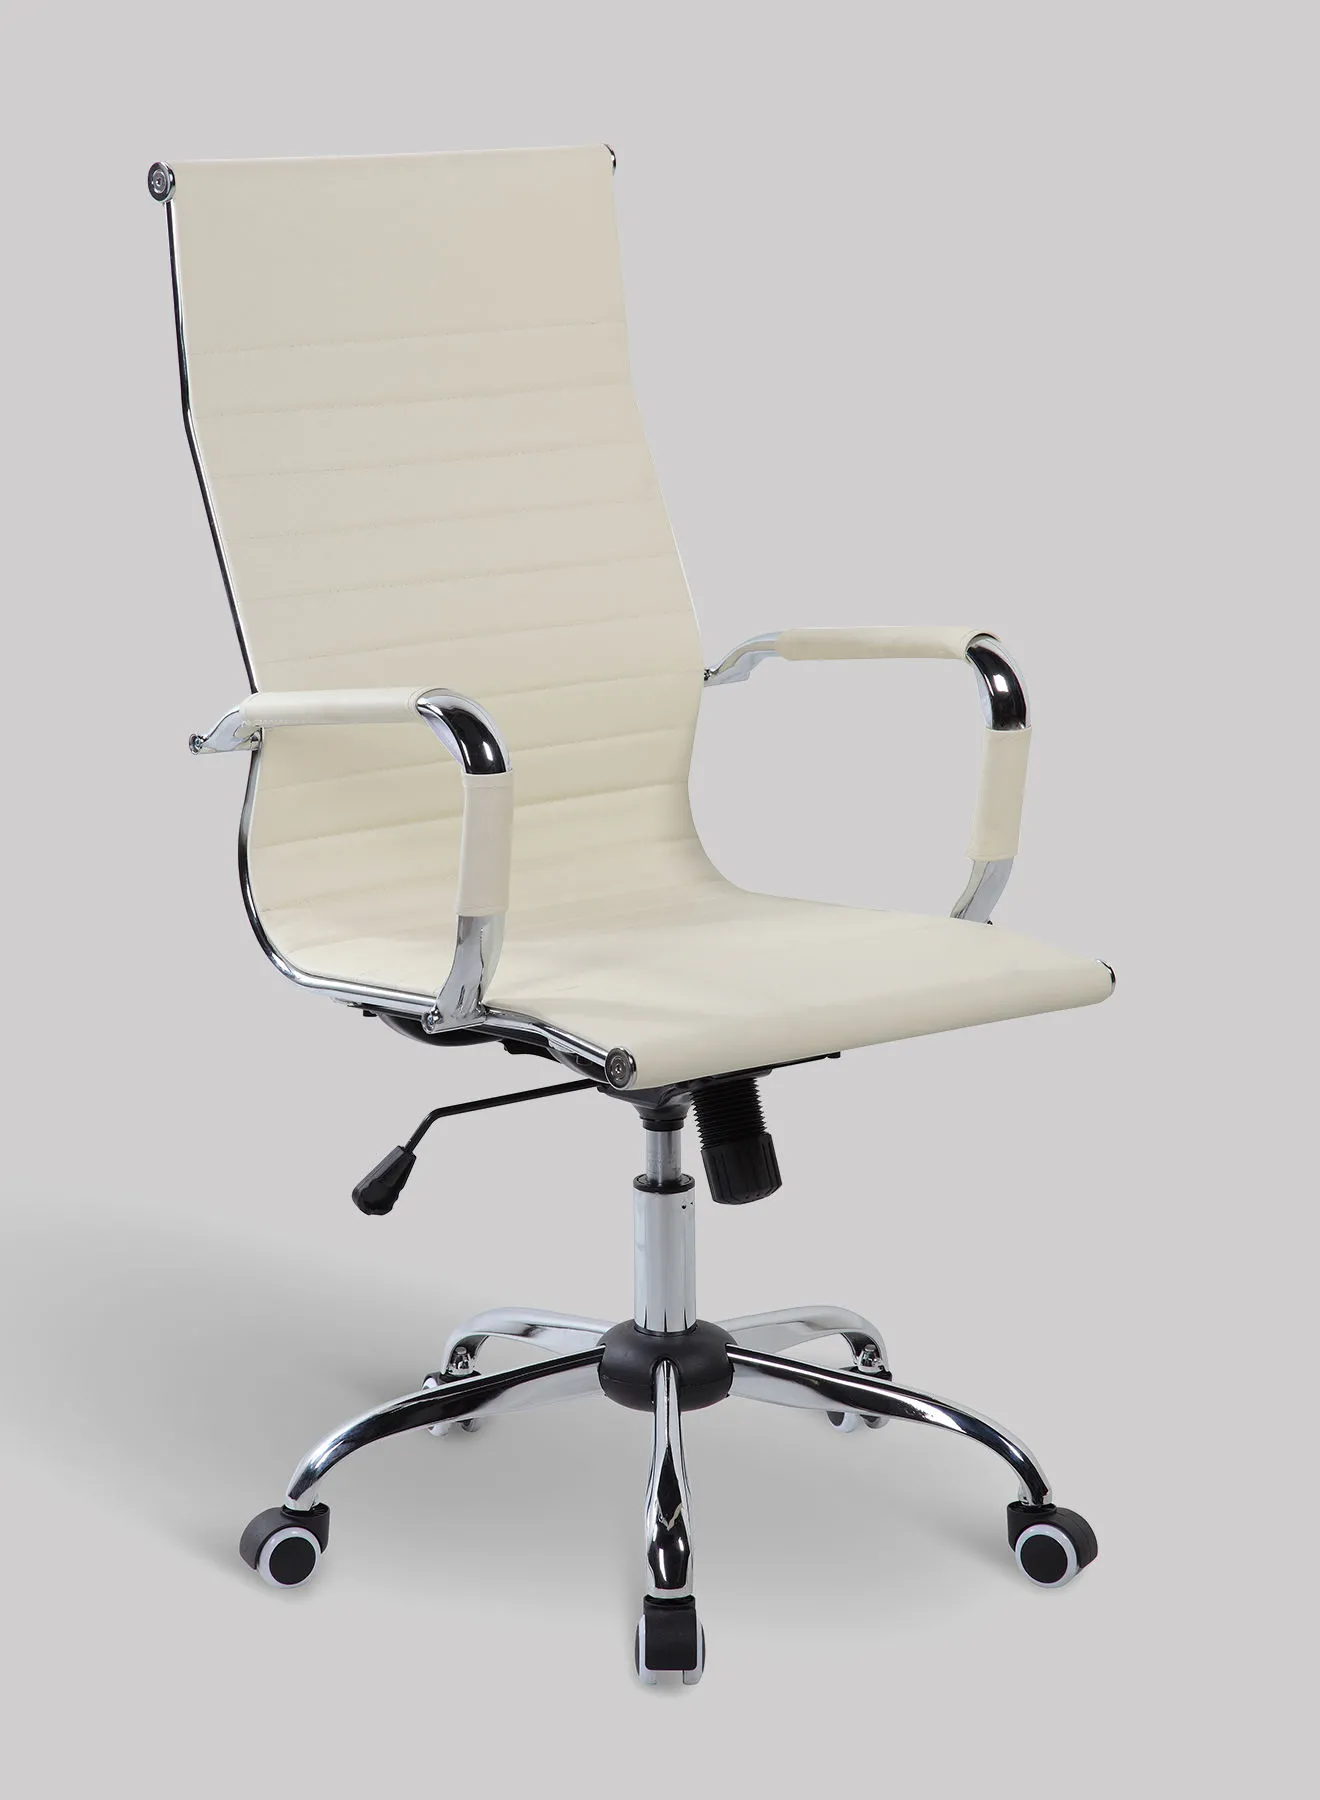 ebb & flow Office Chair Luxurious - In Cream White Pu Backrest And Stainless Steel Swivel Wheel Chair - Size 88 X 36 X 58 For Your Perfect As Home Office Chair